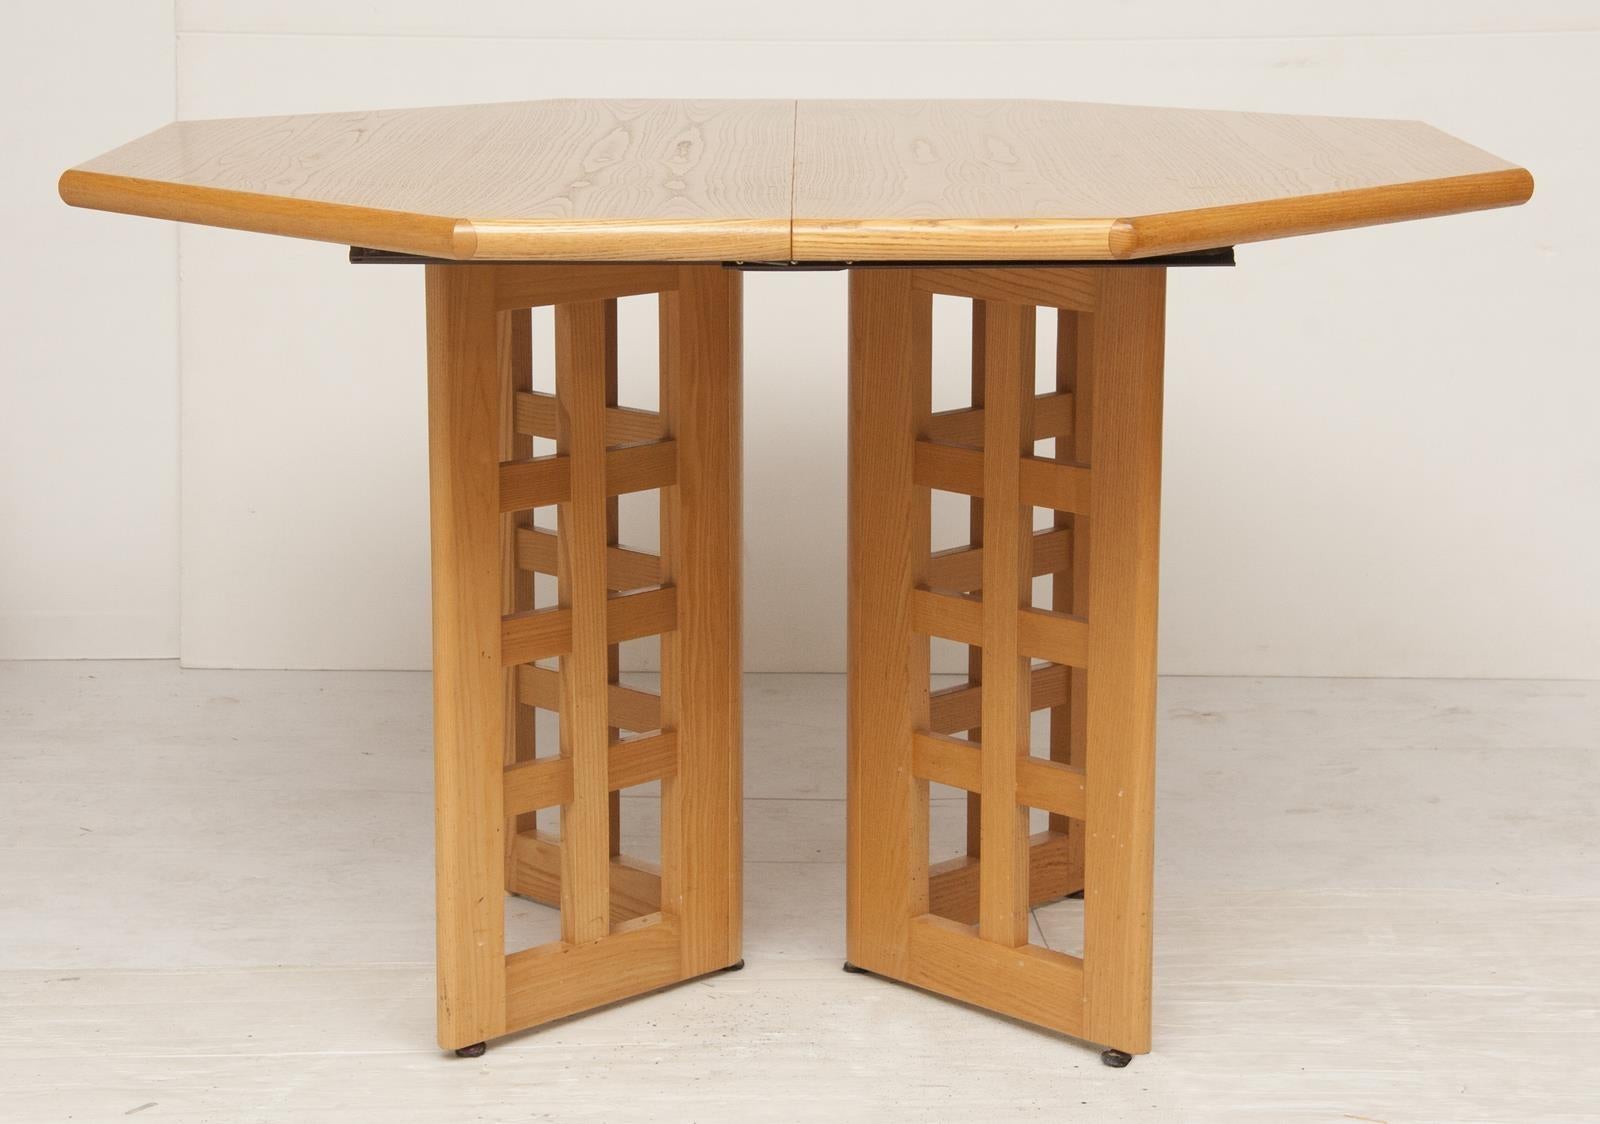 European Solid Beech Extendable Dining Table & 4 Chairs, c.1960 For Sale